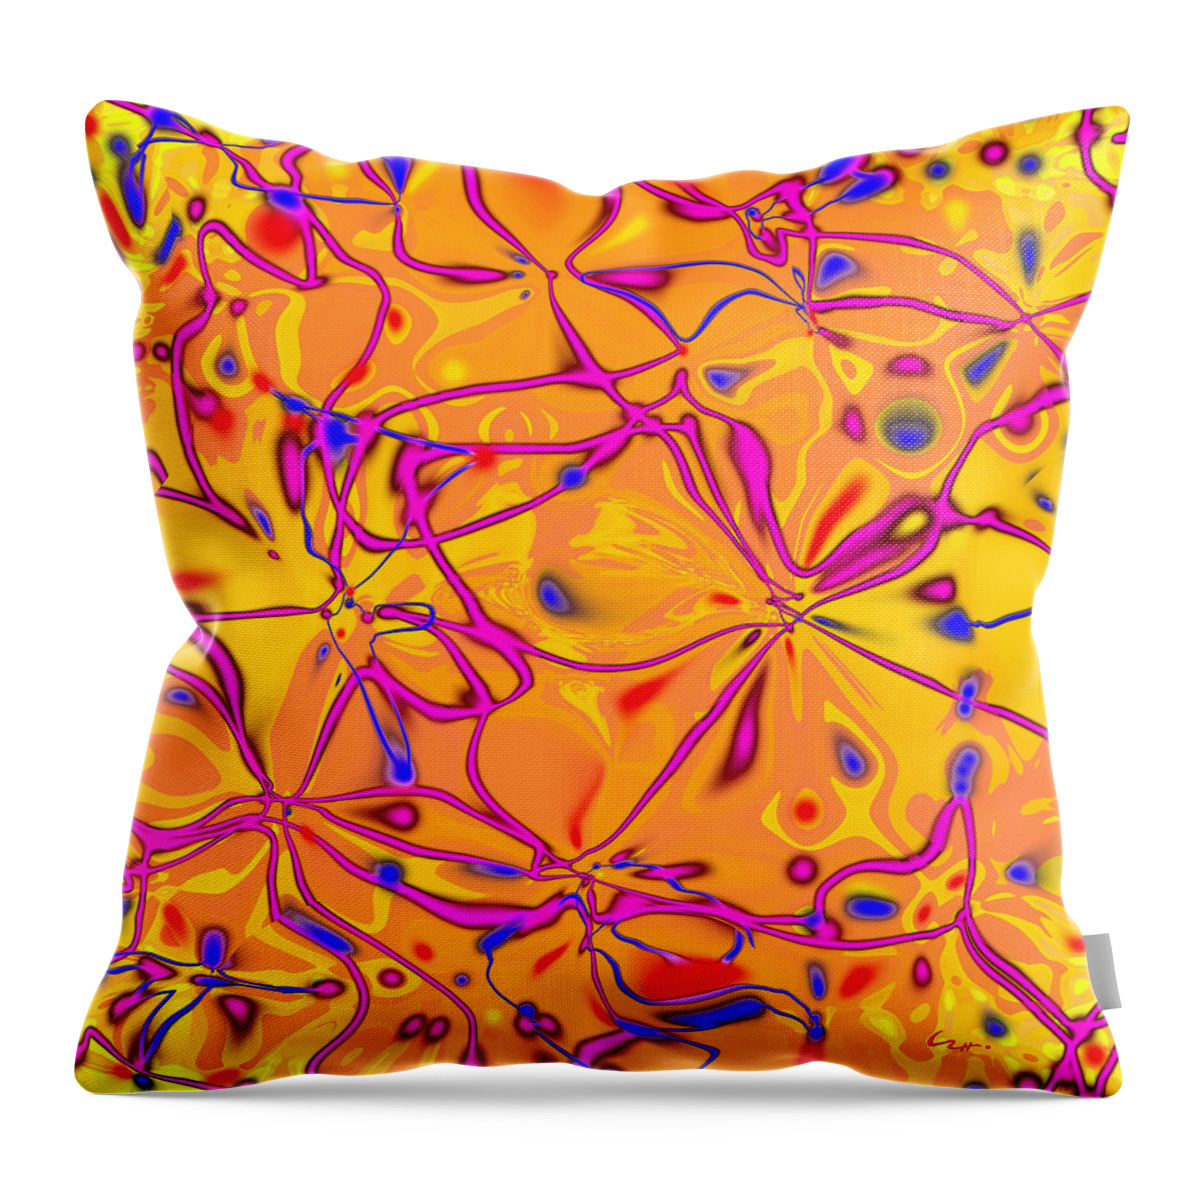 Synaptic Sunrise Throw Pillow featuring the mixed media Synaptic Sunrise by Carl Hunter